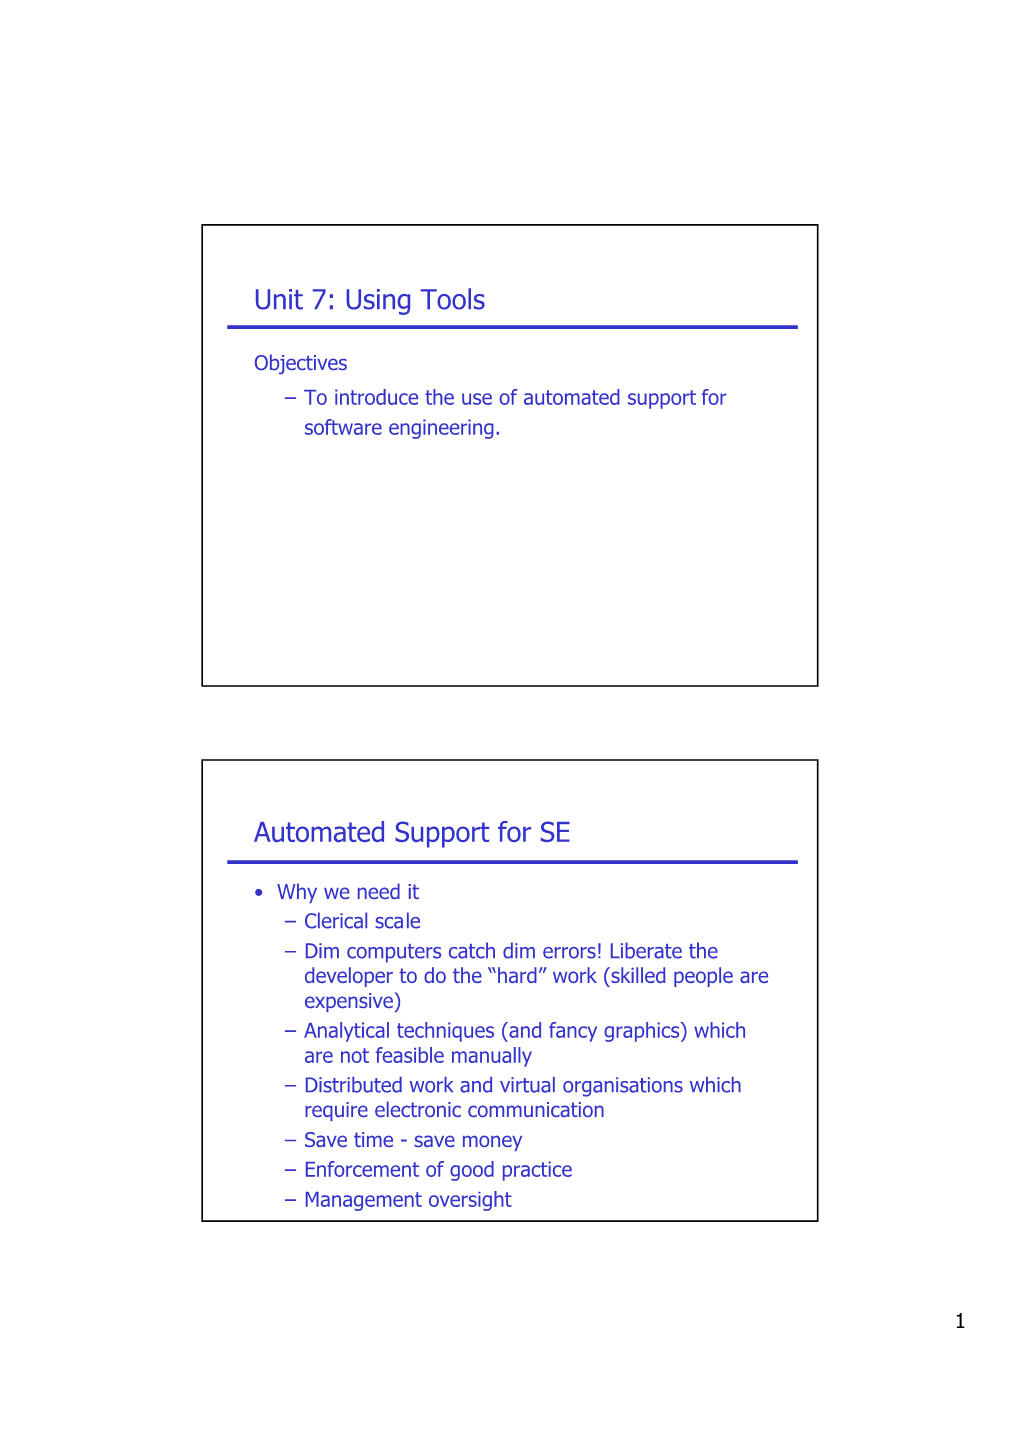 Unit 7: Using Tools Automated Support for SE